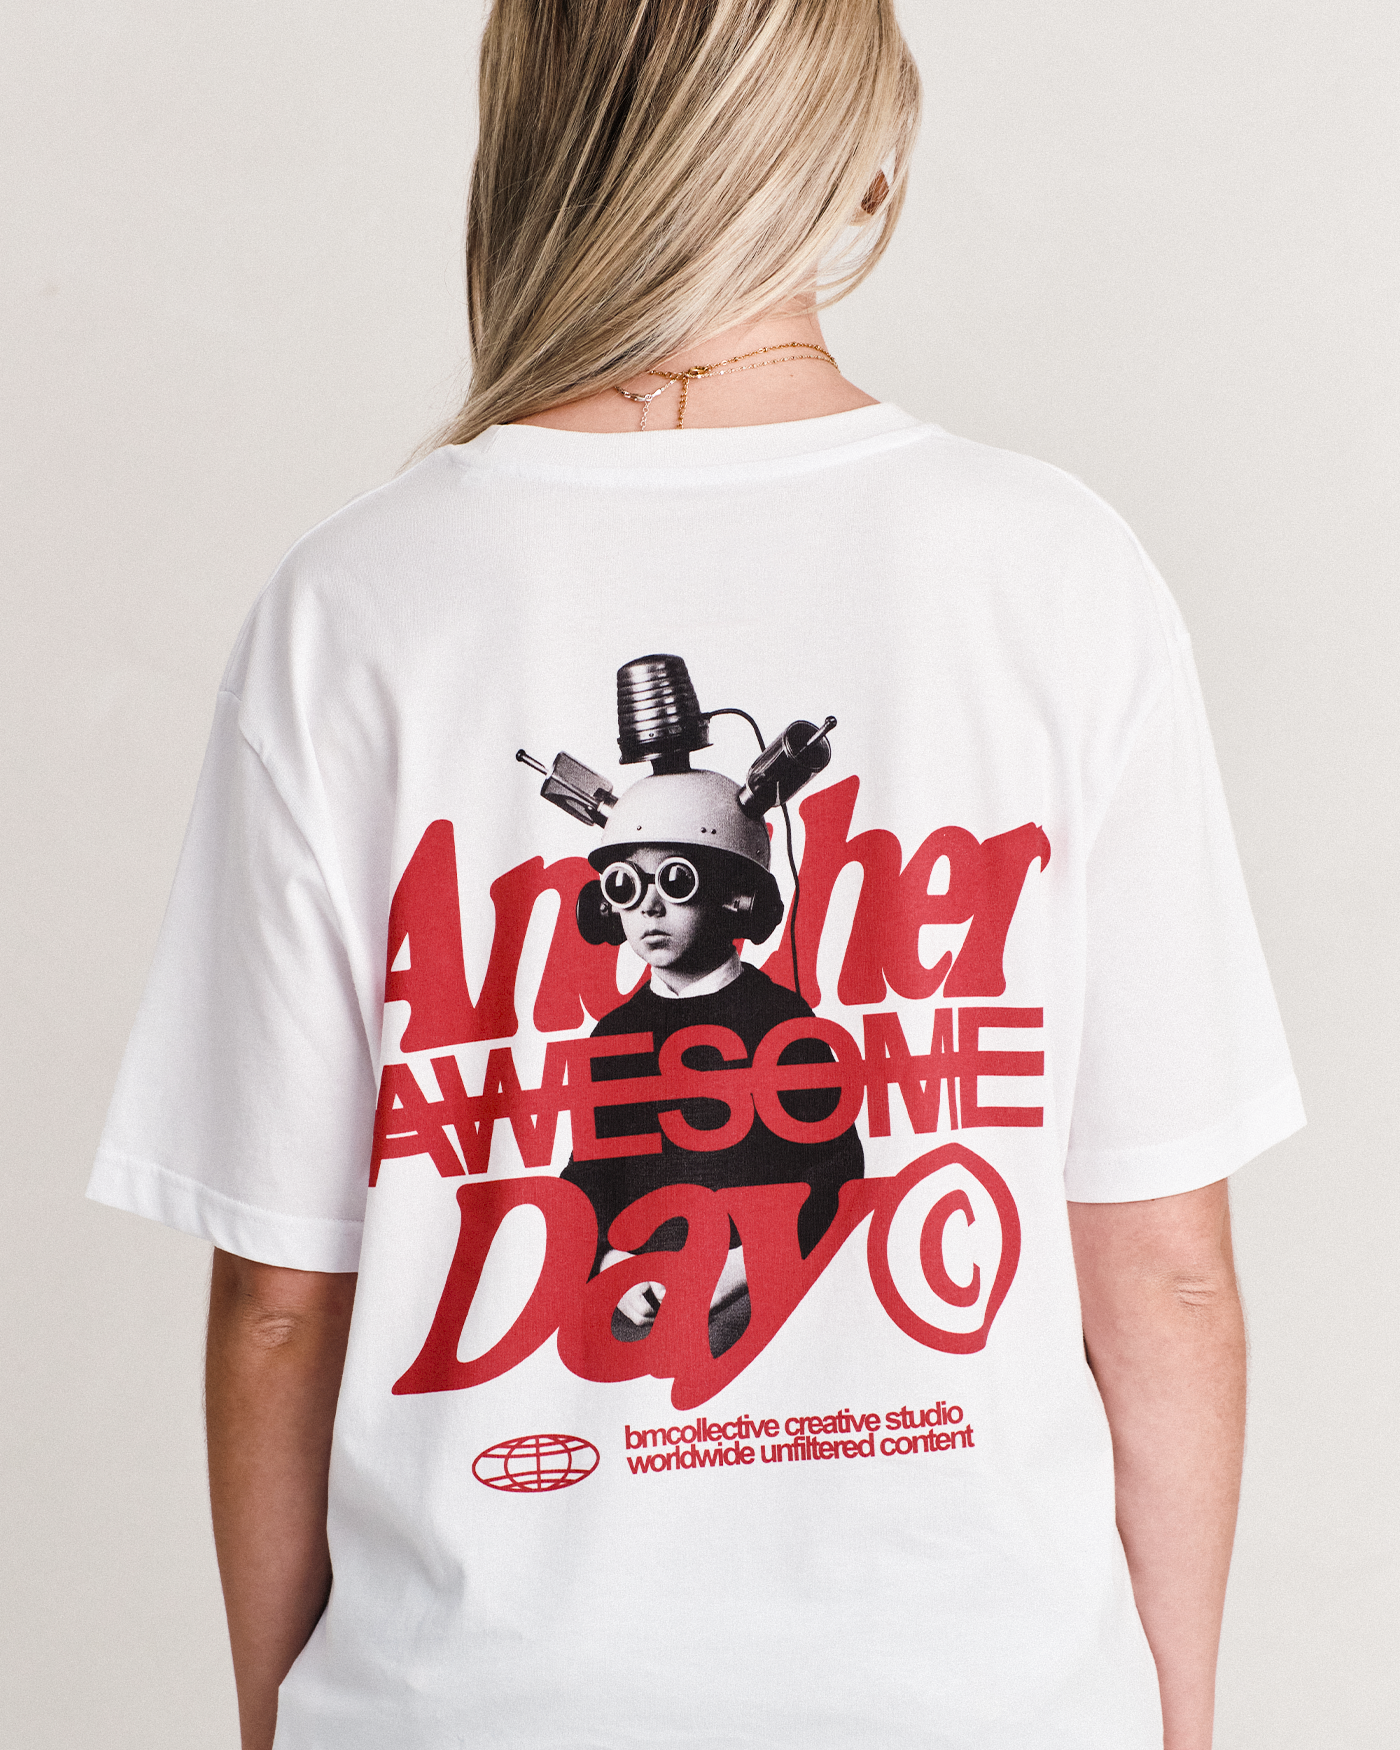 Another Awesome Day Tee